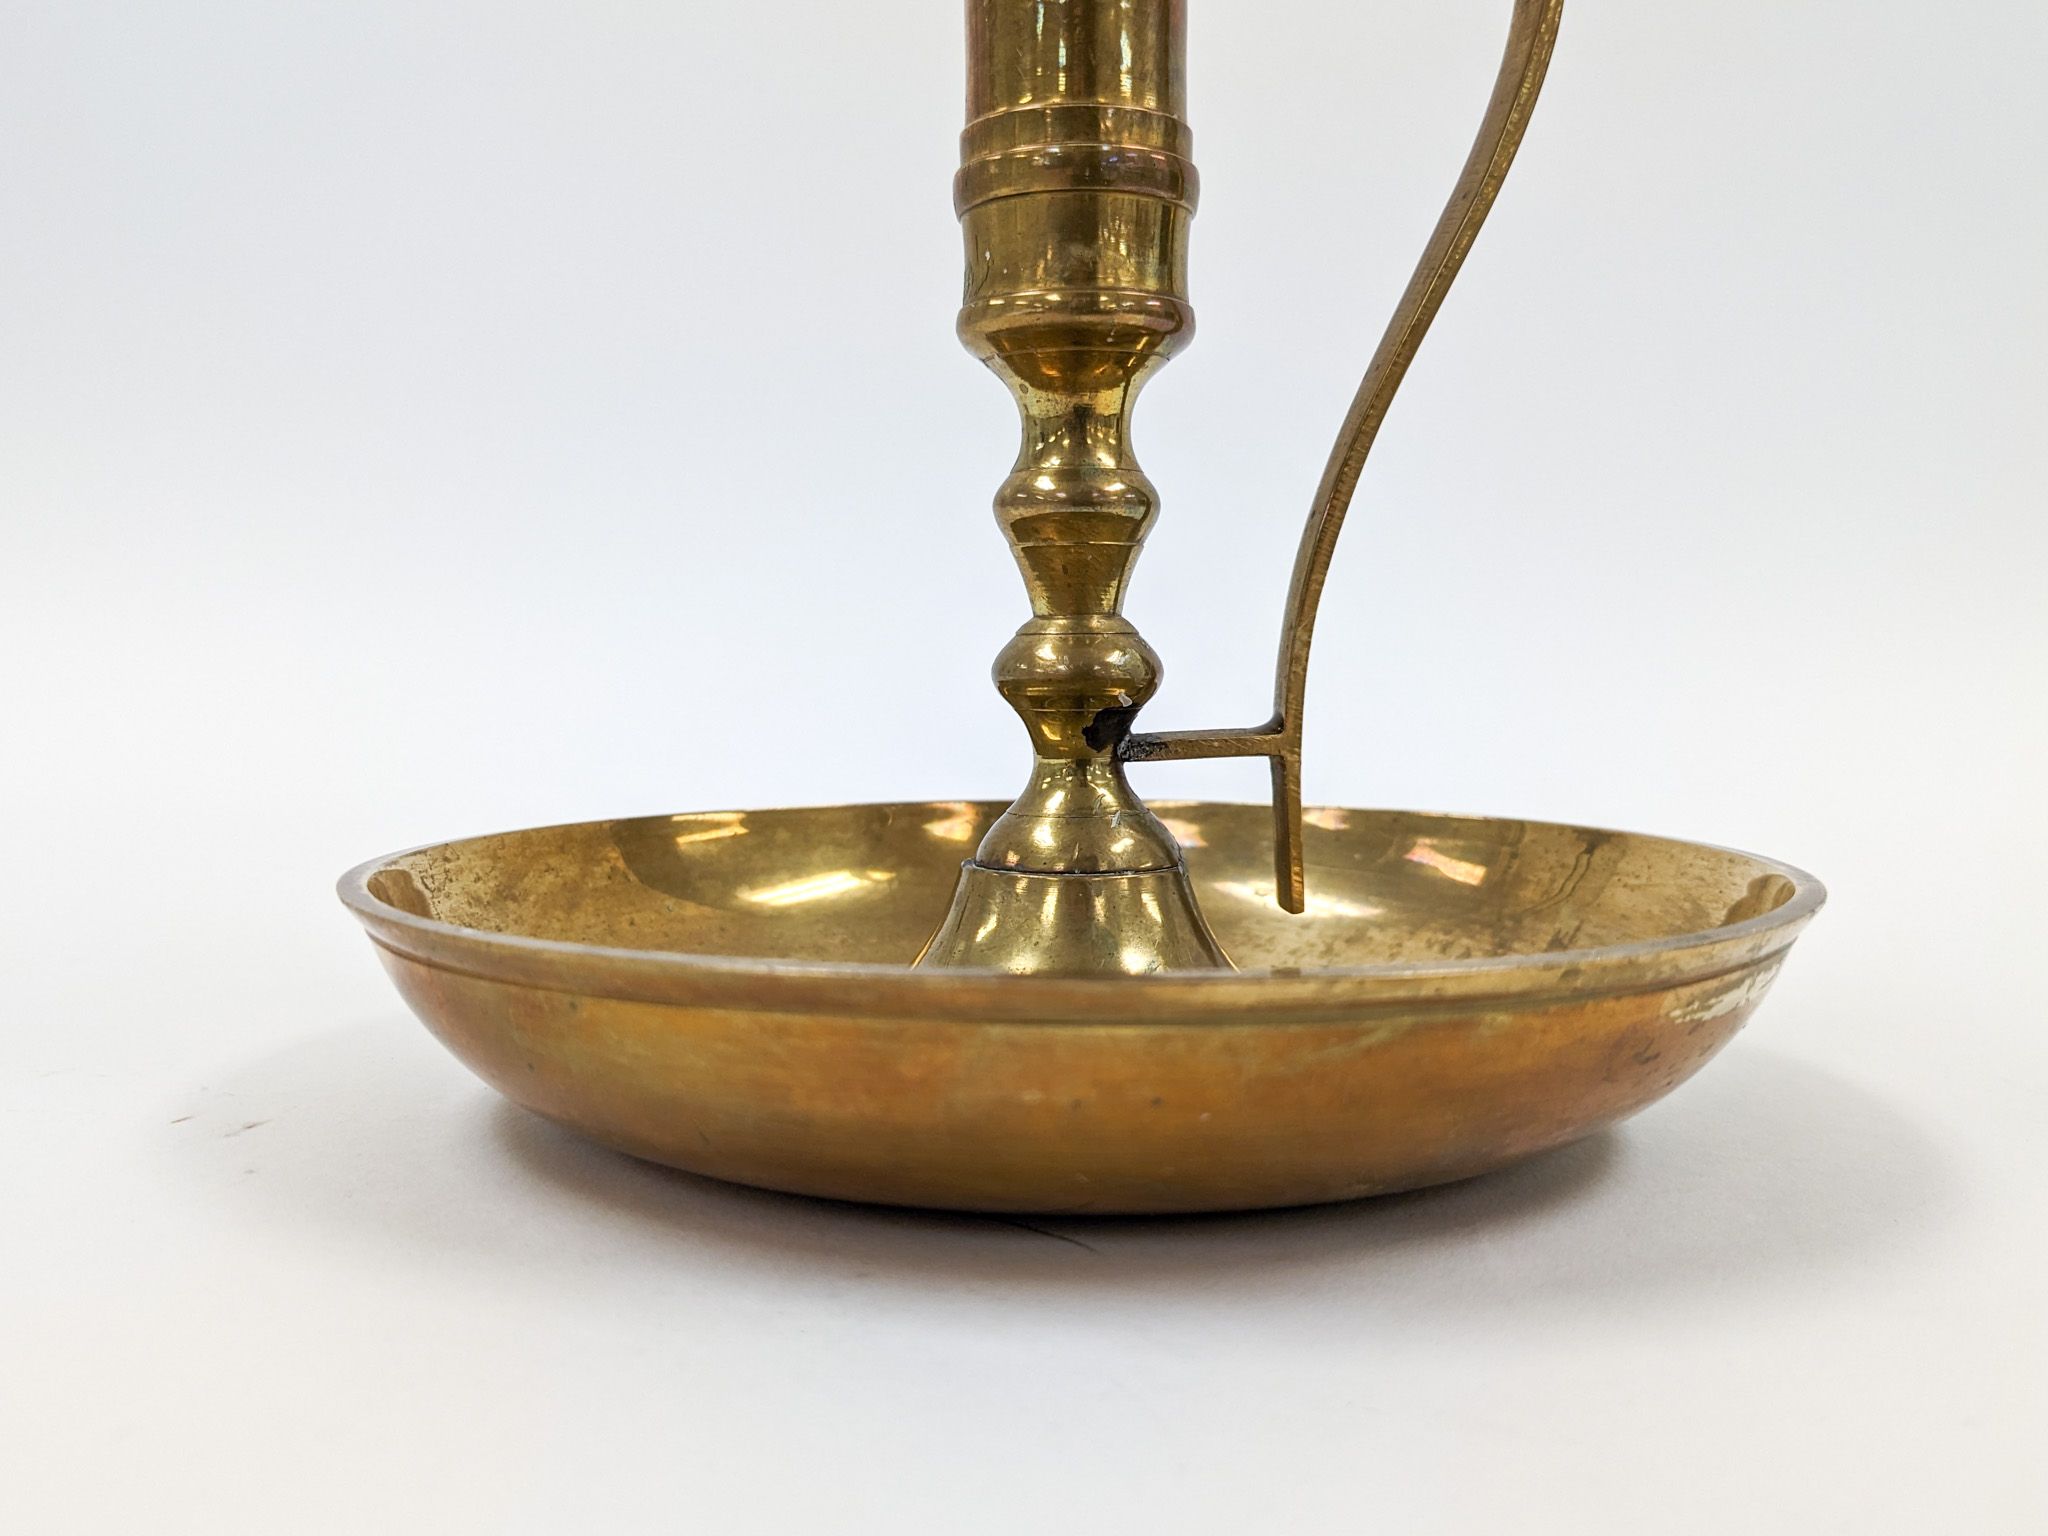 The Classic Maid's Chamberstick in Solid Brass